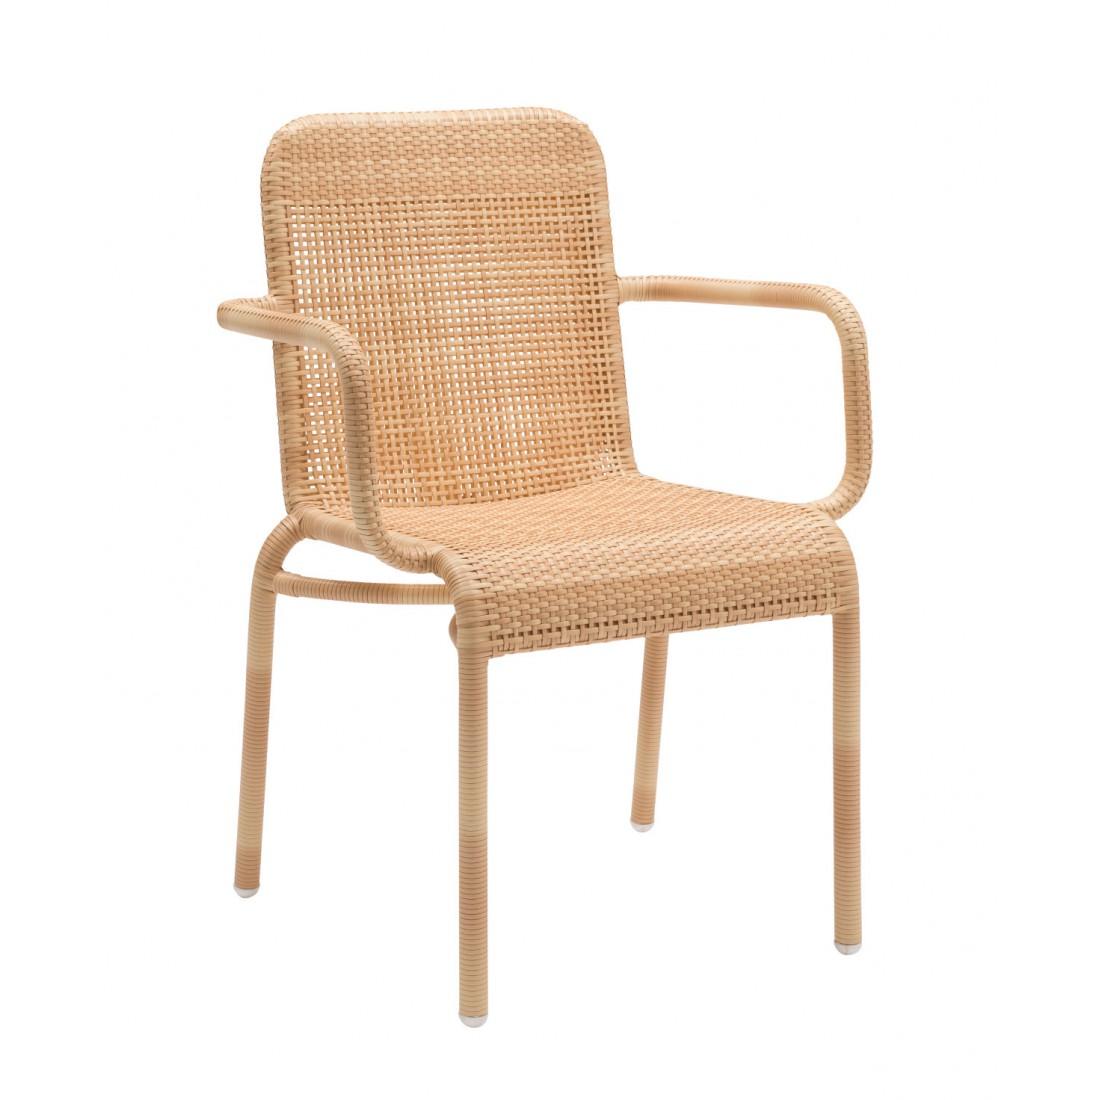 French design armchair composed of a tubular structure dressed with a braided resin rattan effect. Indoor/outdoor, it will be perfect on your terrace, in your veranda, your winter garden, your swimming-pool, even around the dining table! French